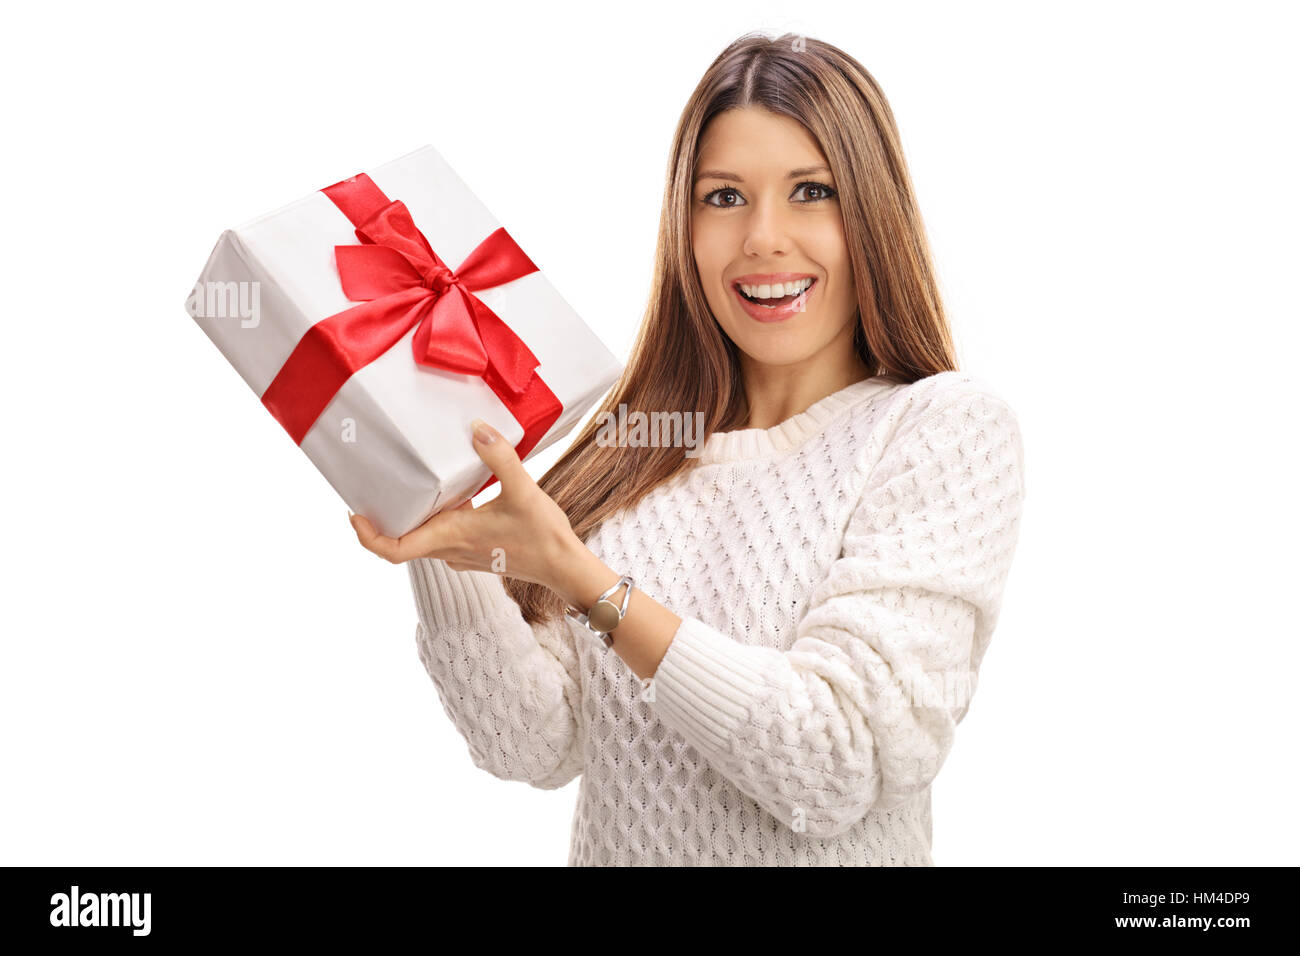 Delighted woman holding a present isolated on white background Stock Photo